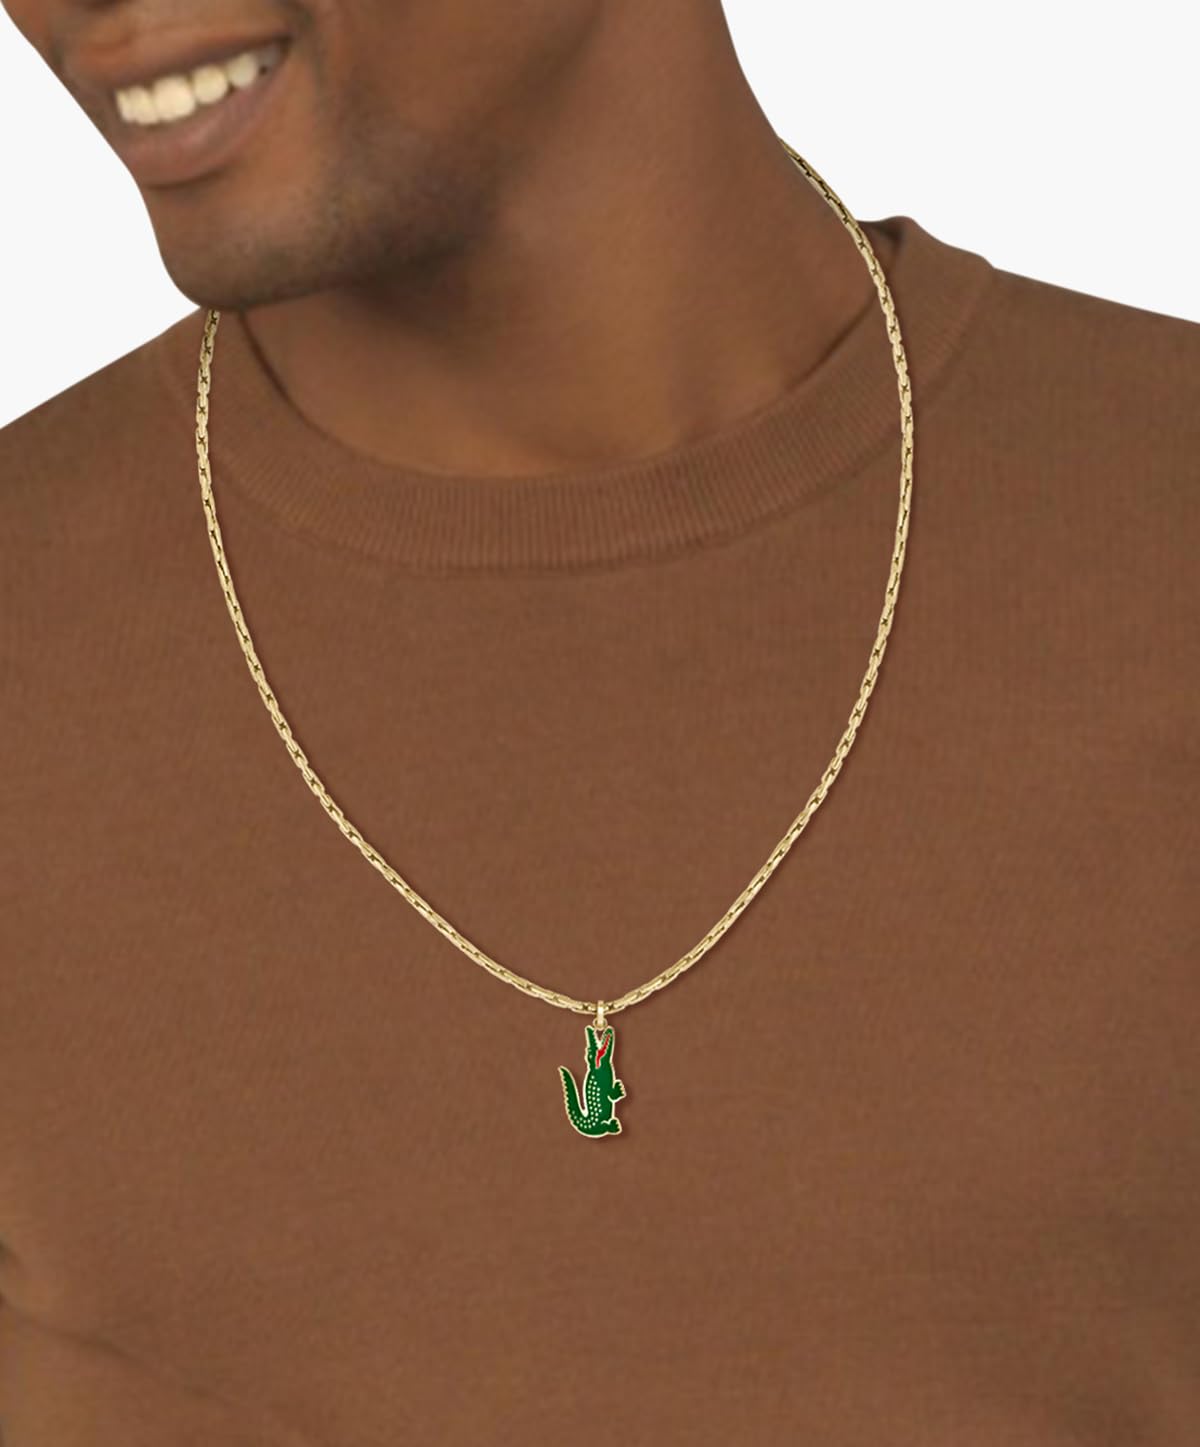 Lacoste Men's Arthor Jewelry Necklace, Stainless Steel, Rectangular Box Chain Necklace, Reversible Pendant, Fashionable